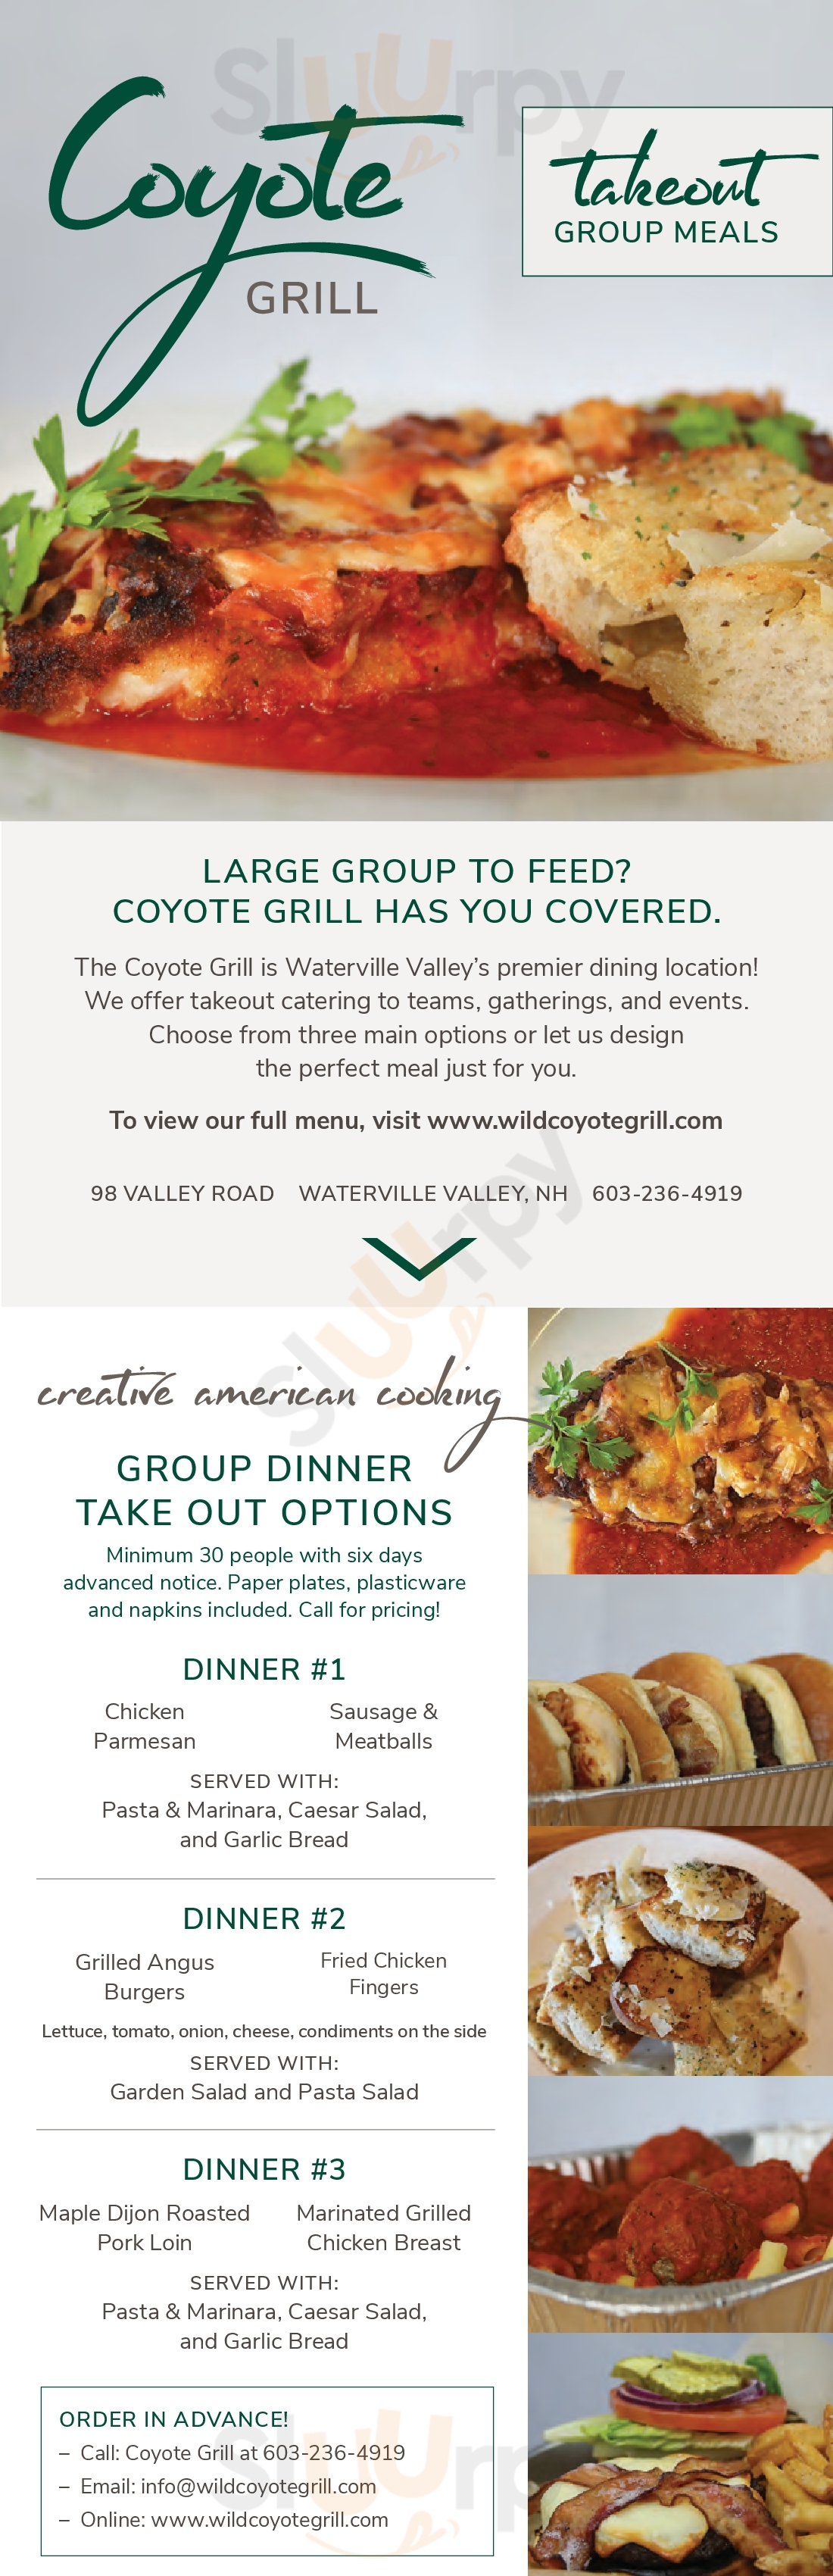 Coyote Grill Waterville Valley Menu - 1